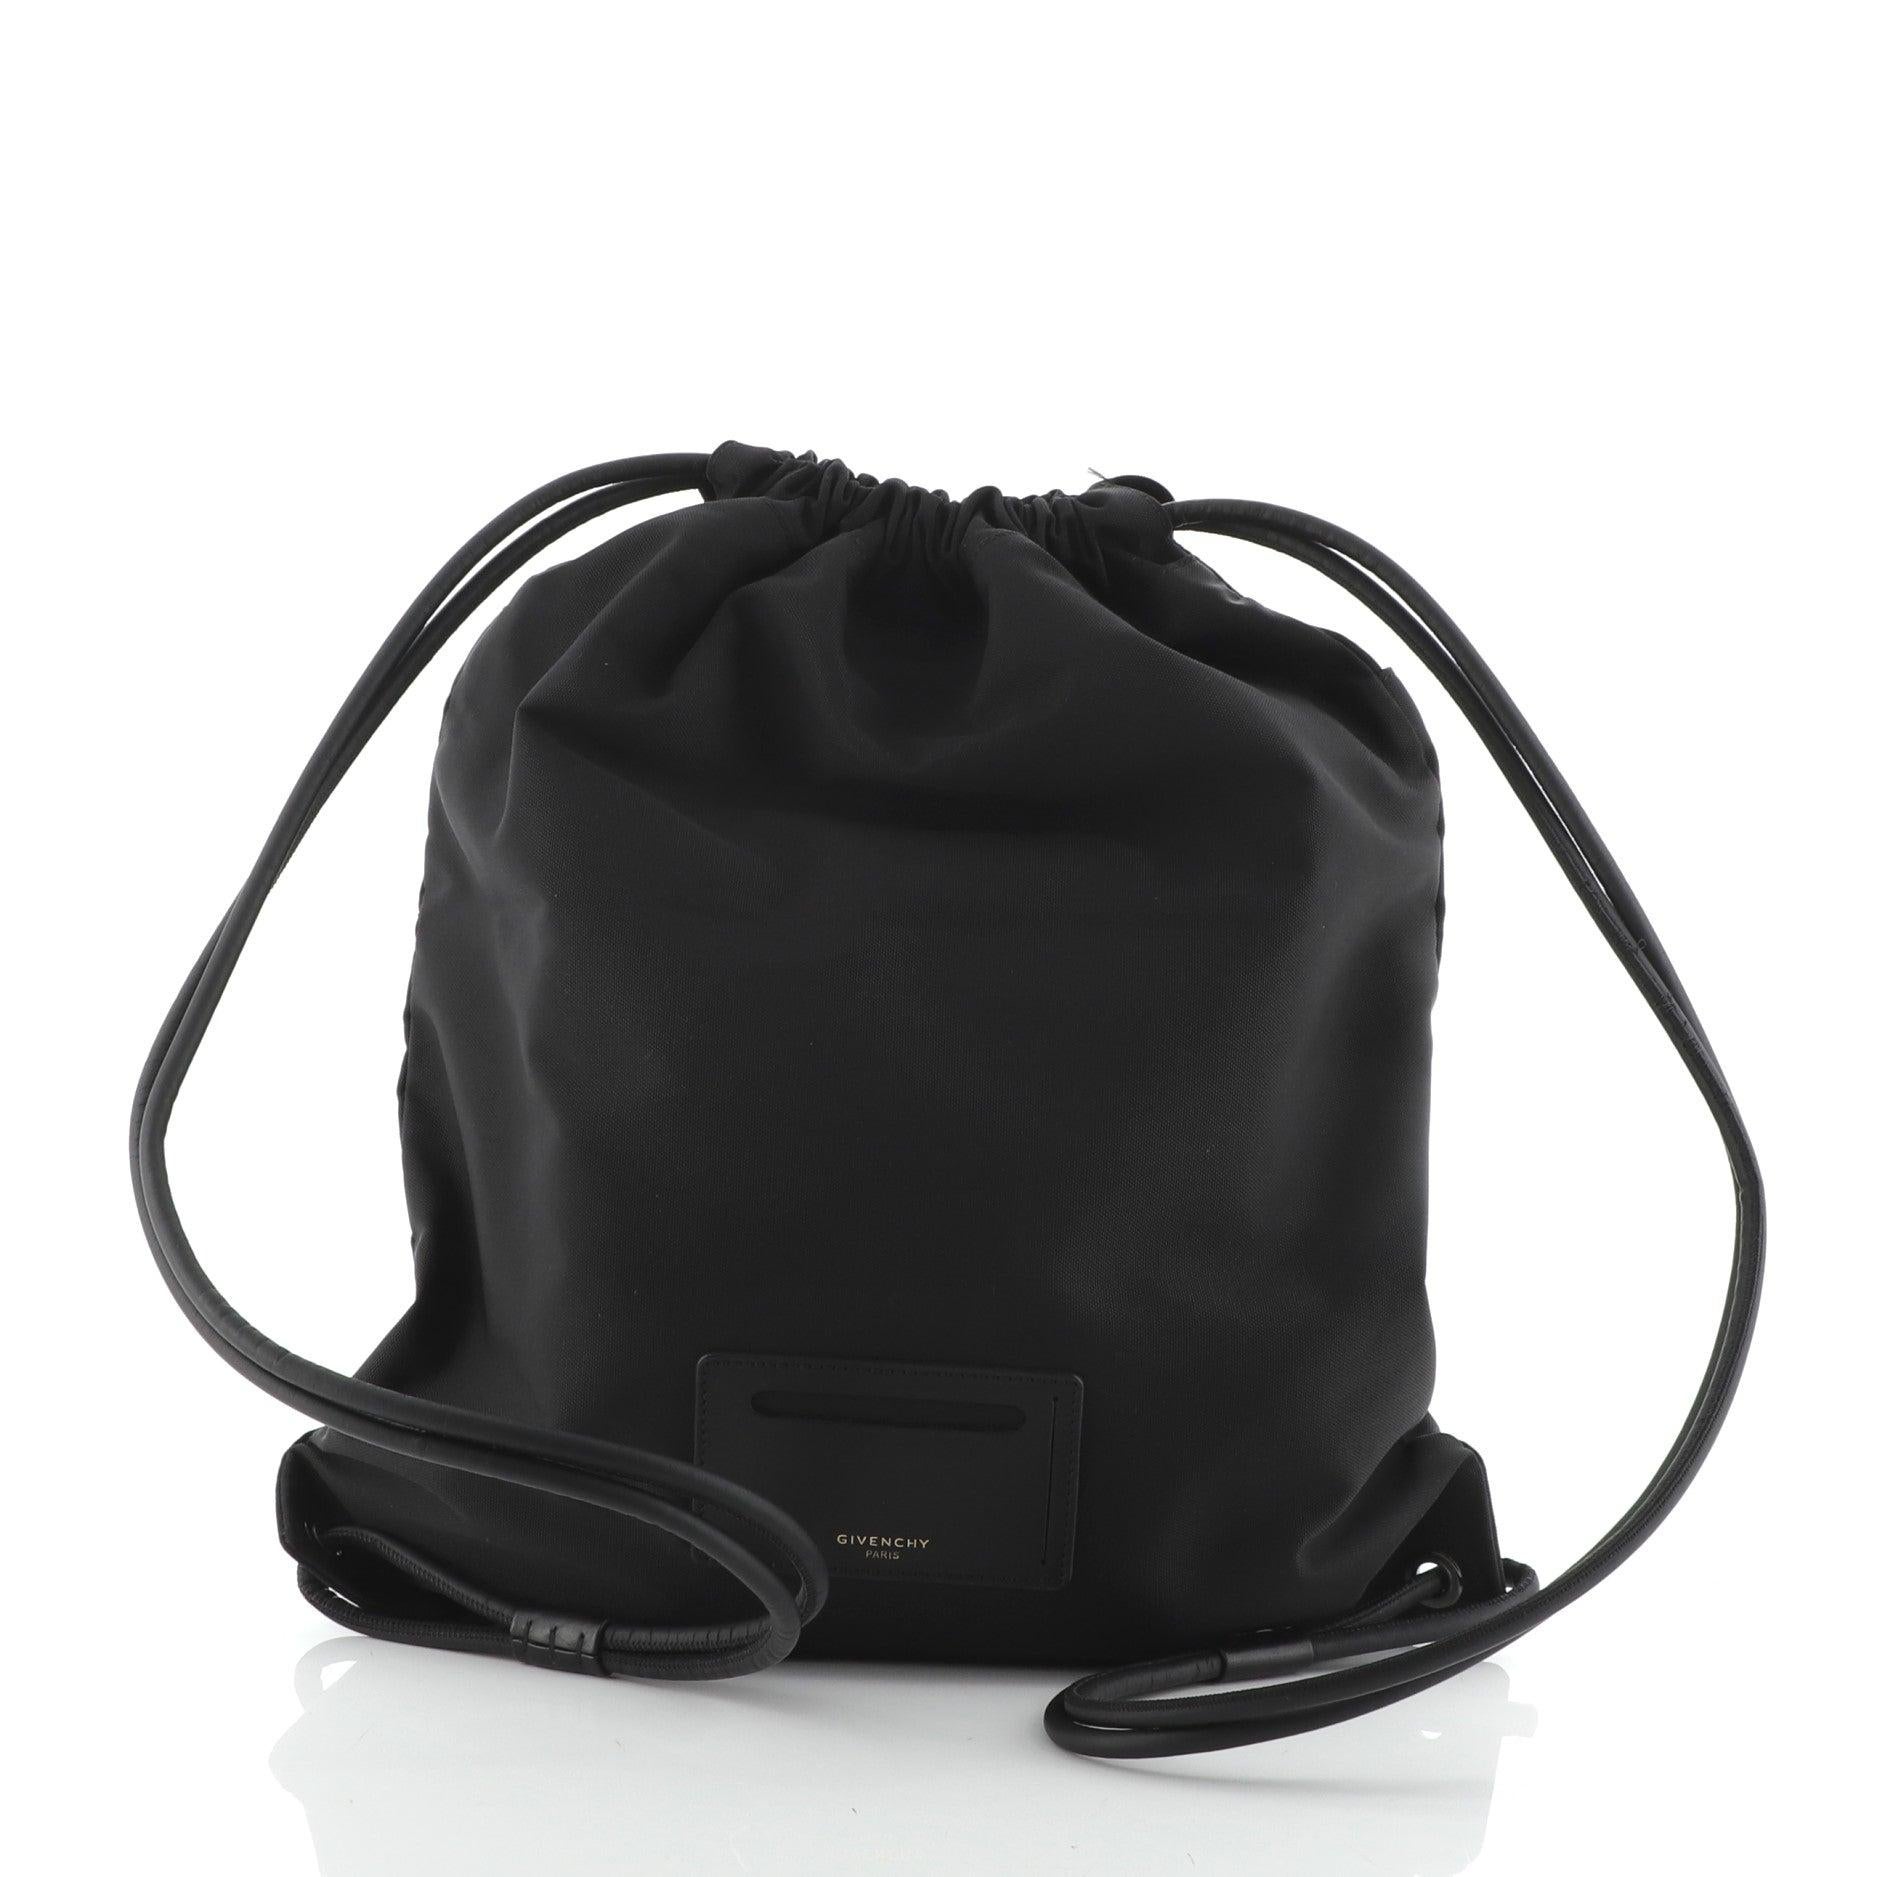 Givenchy Drawstring Backpack Nylon Large
Black Nylon

Condition Details: Minor wear on exterior and in interior, scratches on hardware.

51921MSC

Height 18